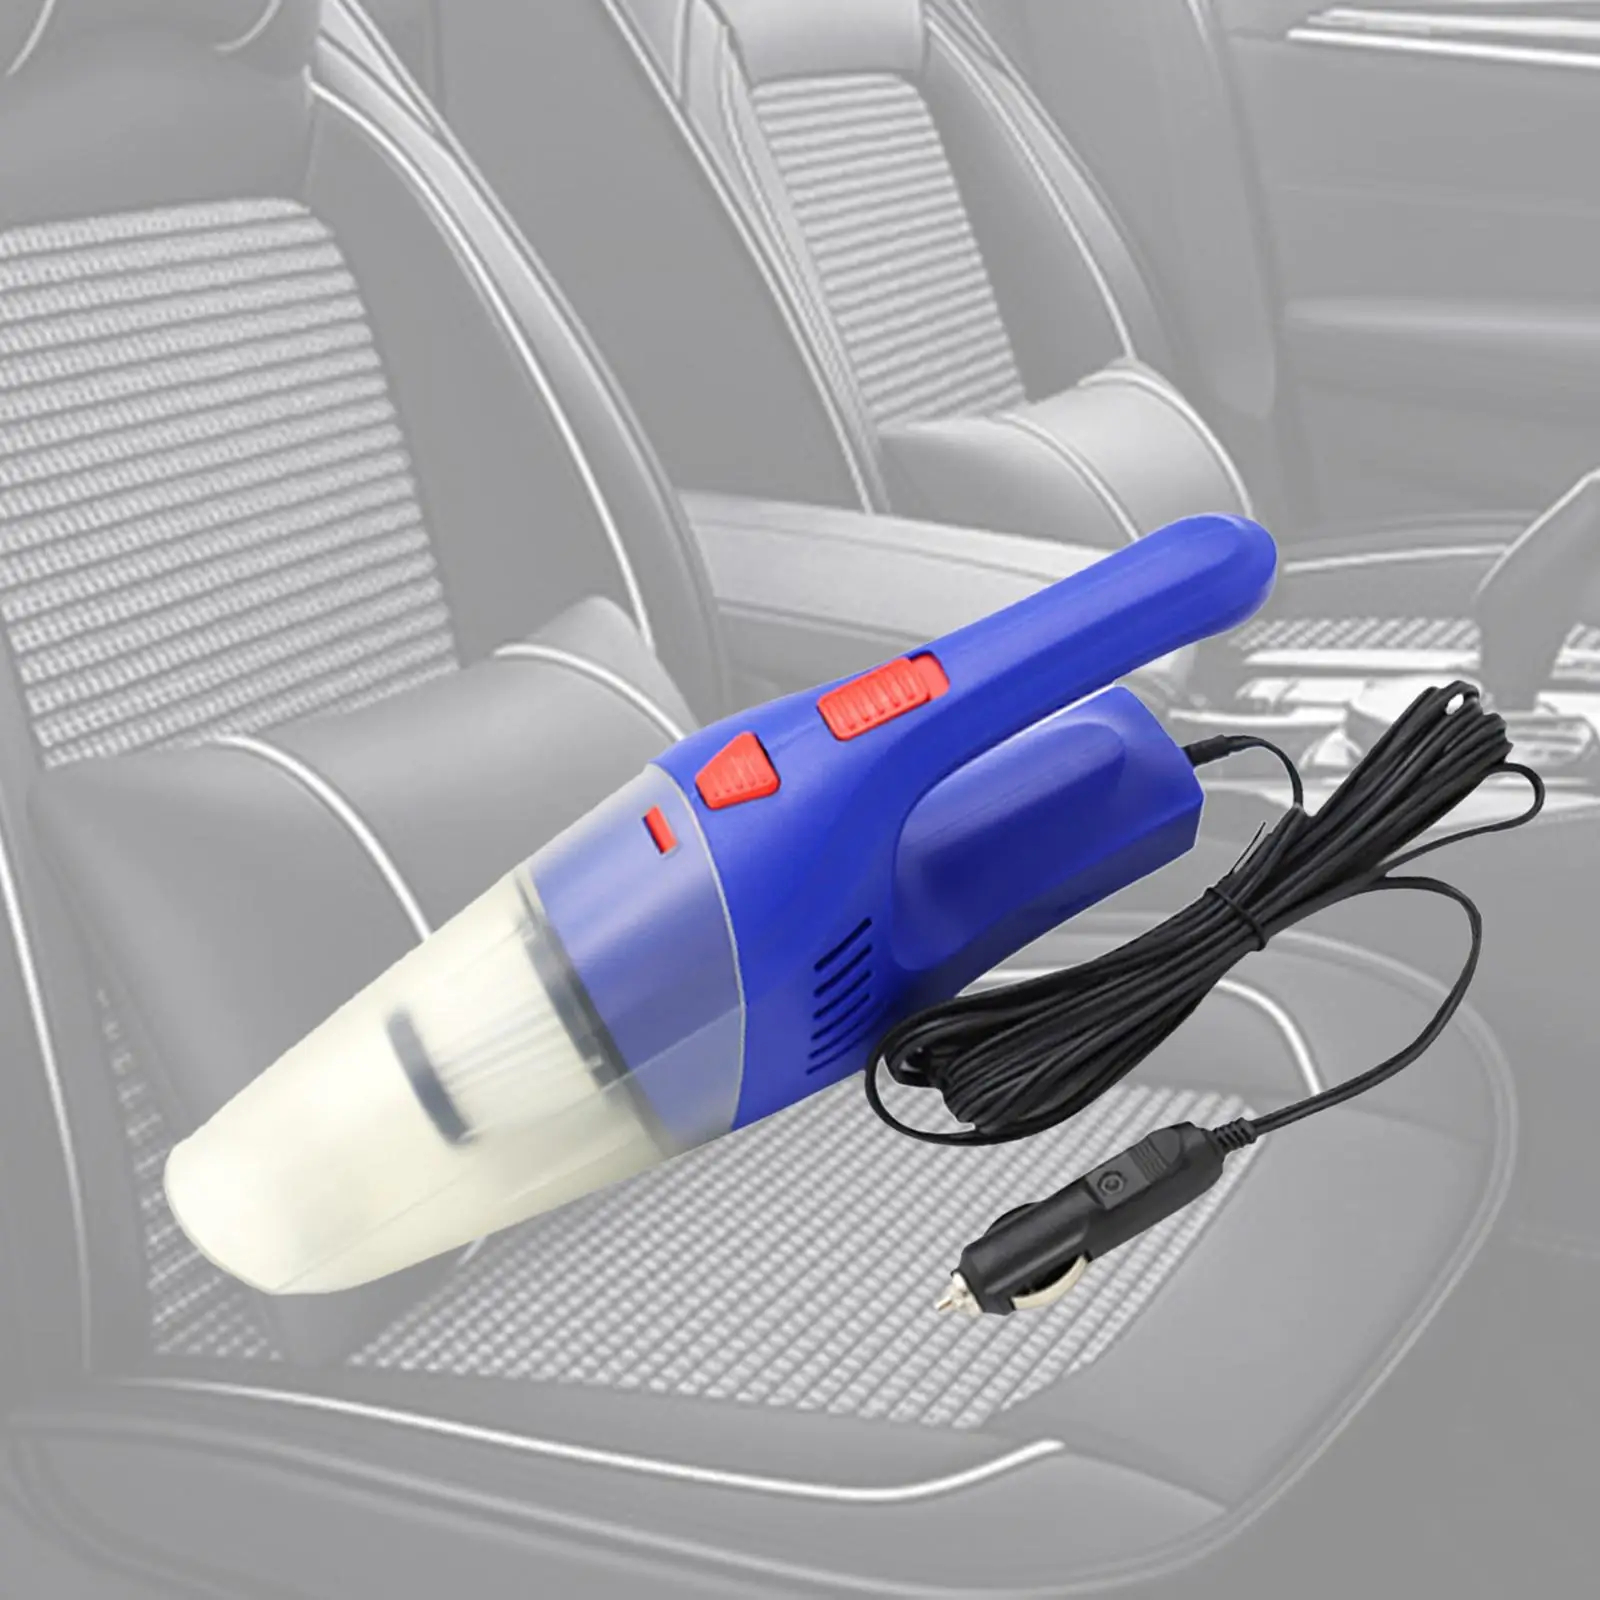 Handheld Car Vacuum Cleaner 6000PA Dry and Wet Use for Home Supplies